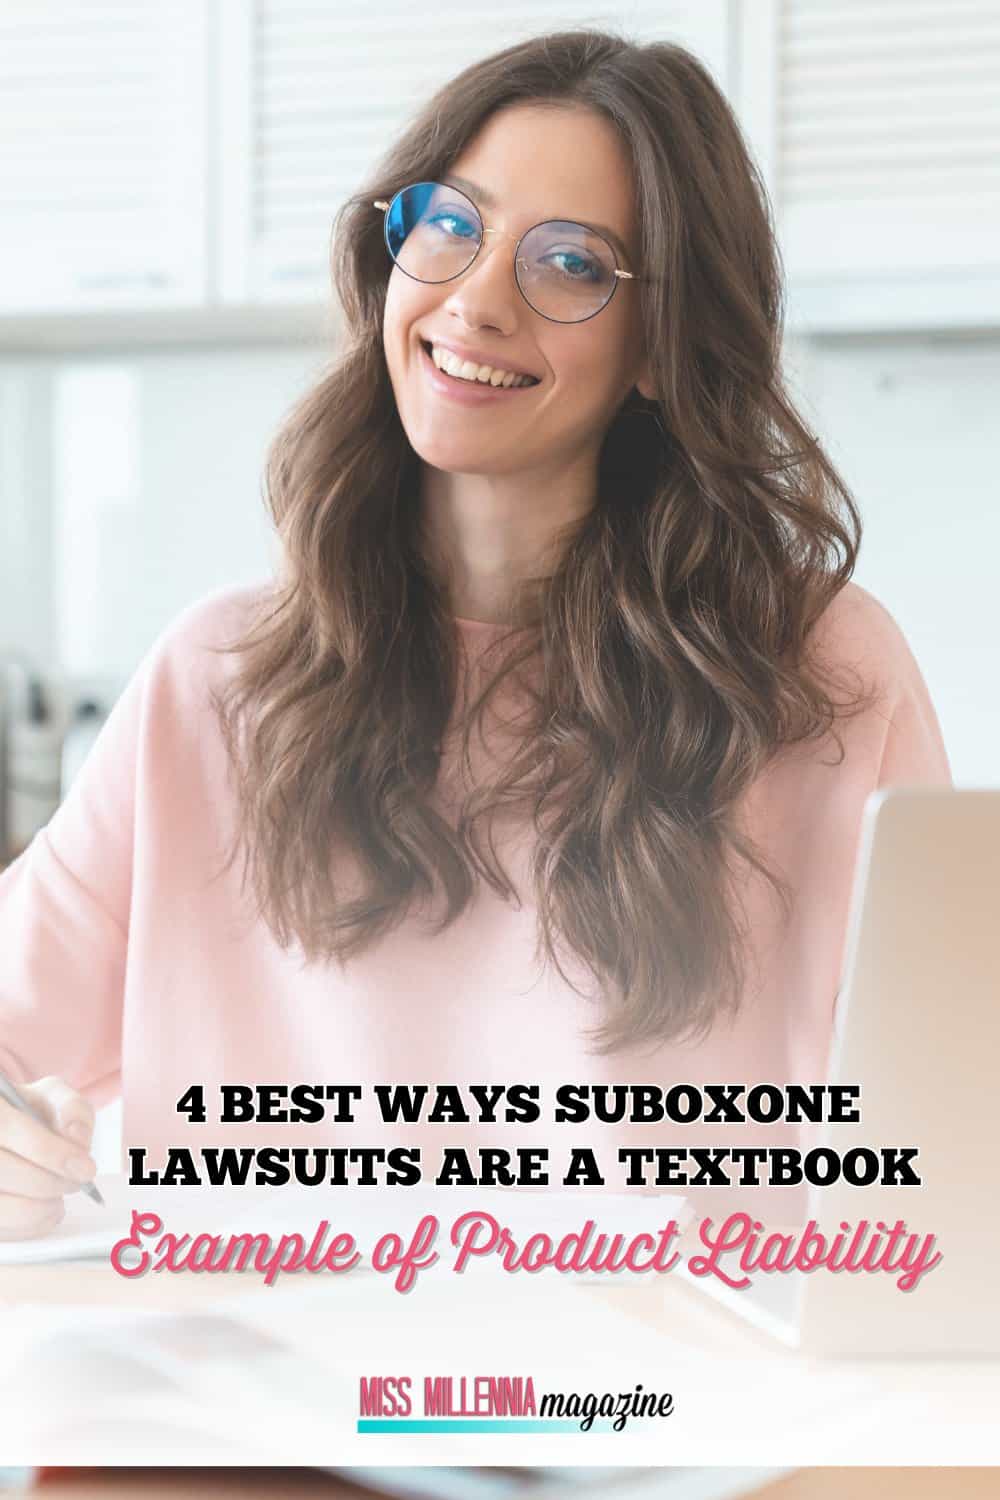 4 Best Ways Suboxone Lawsuits Are a Textbook Example for Product Liability